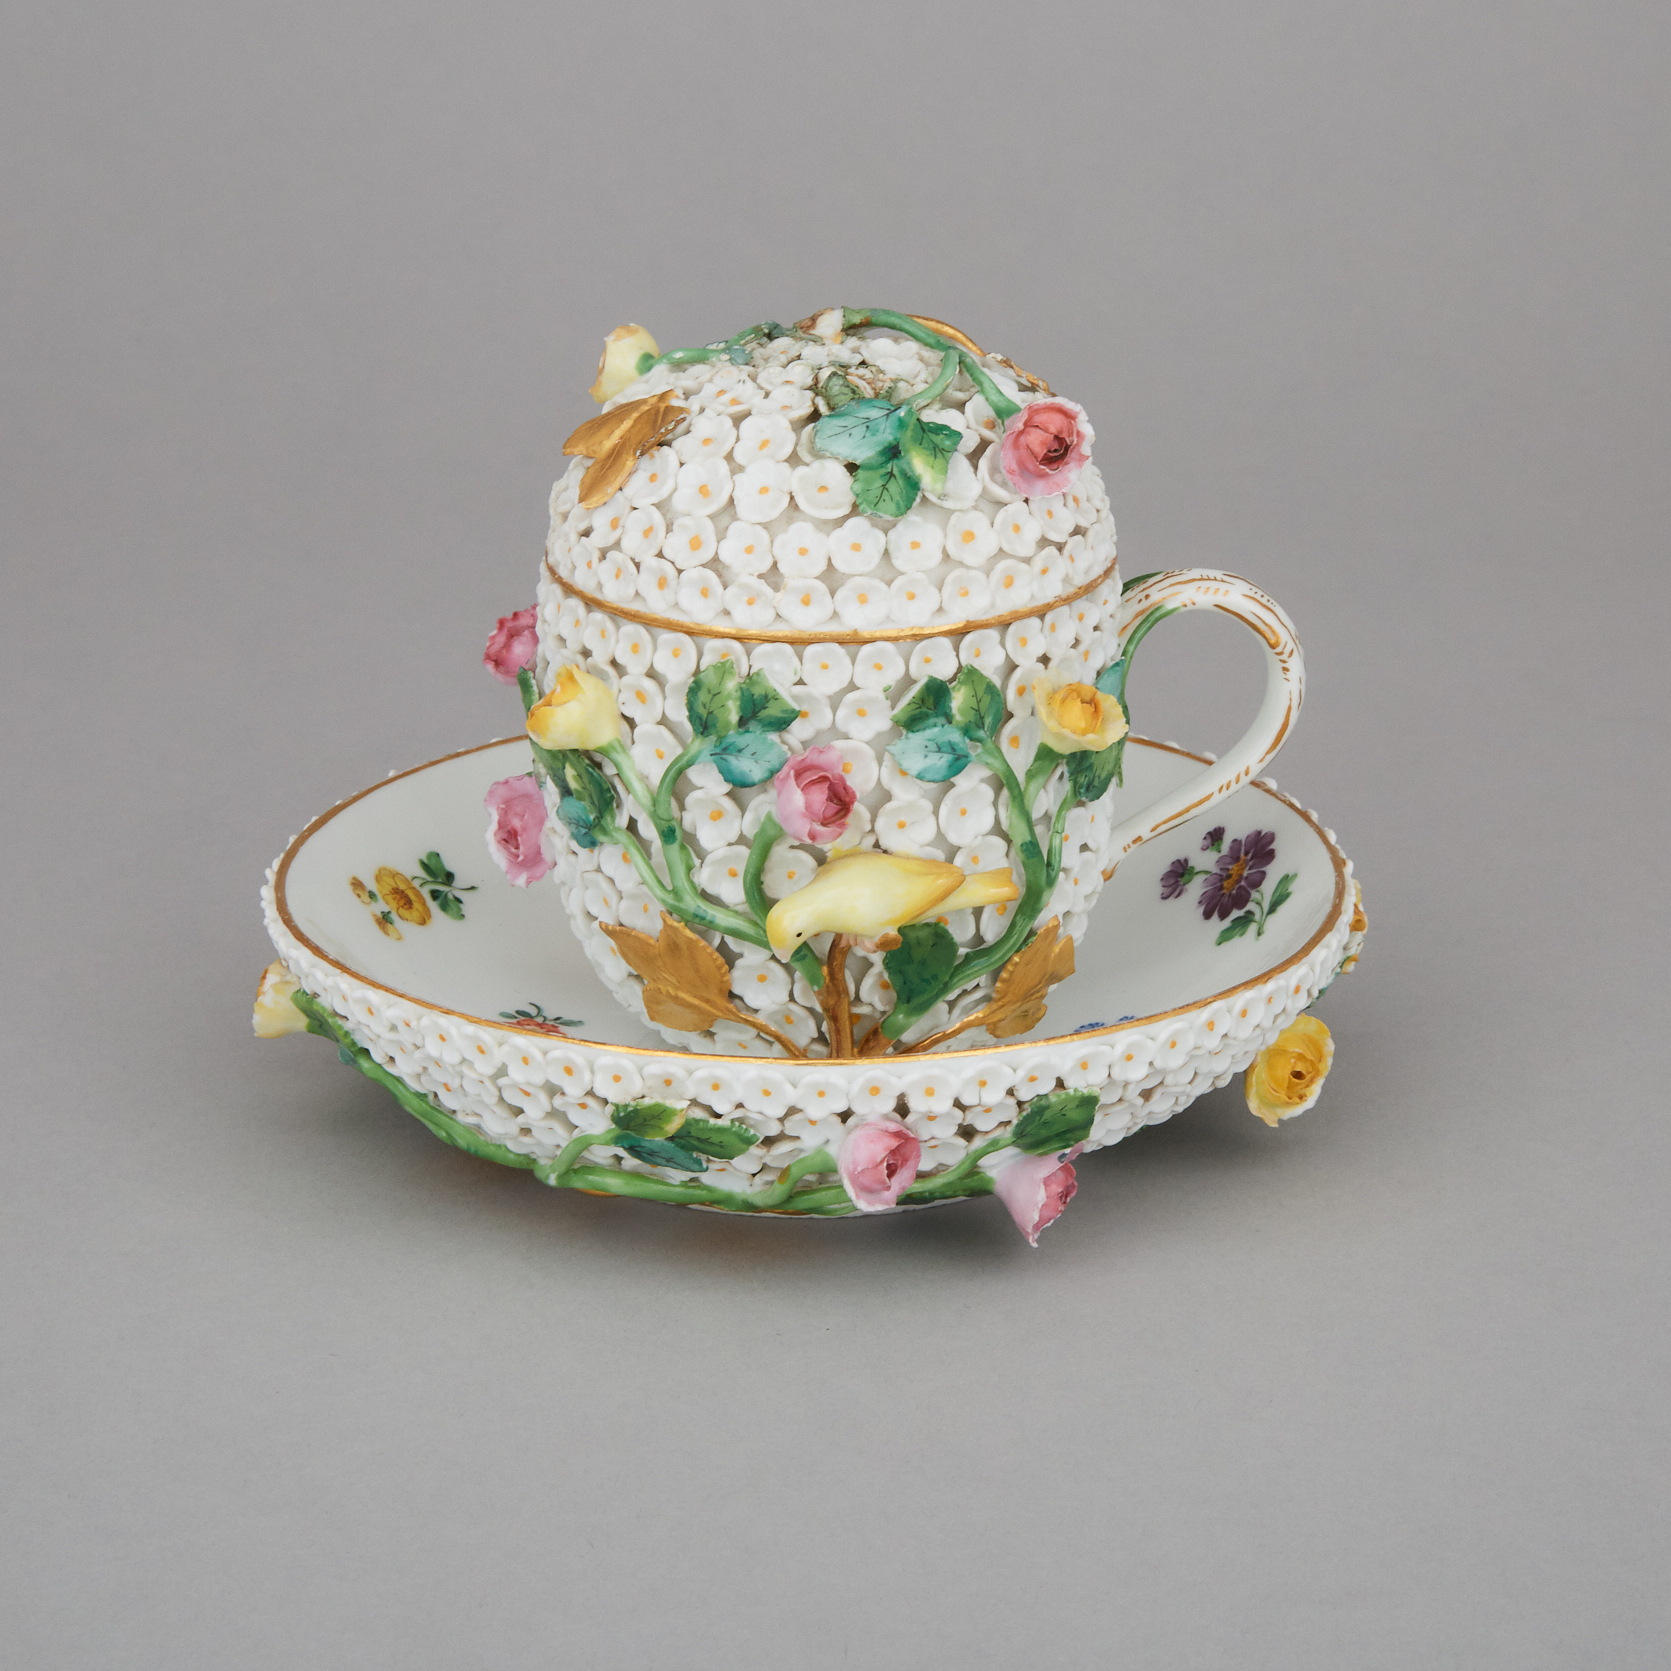 Meissen Schneeballen Covered Cup and Saucer, late 19th century